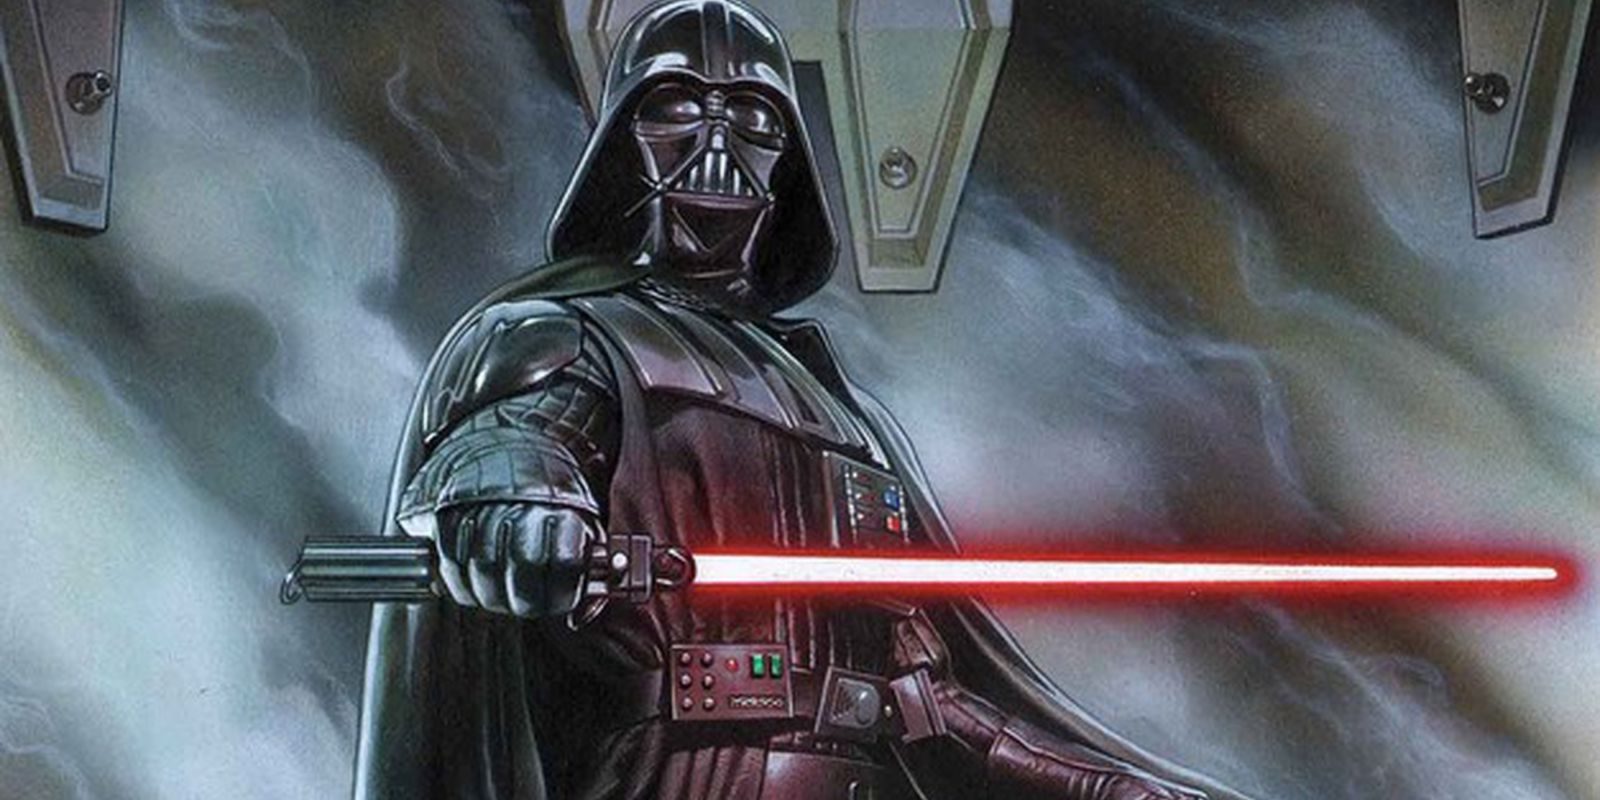 Star Wars Darth Vader Vader Down Graphic Novel Review By Deffinition